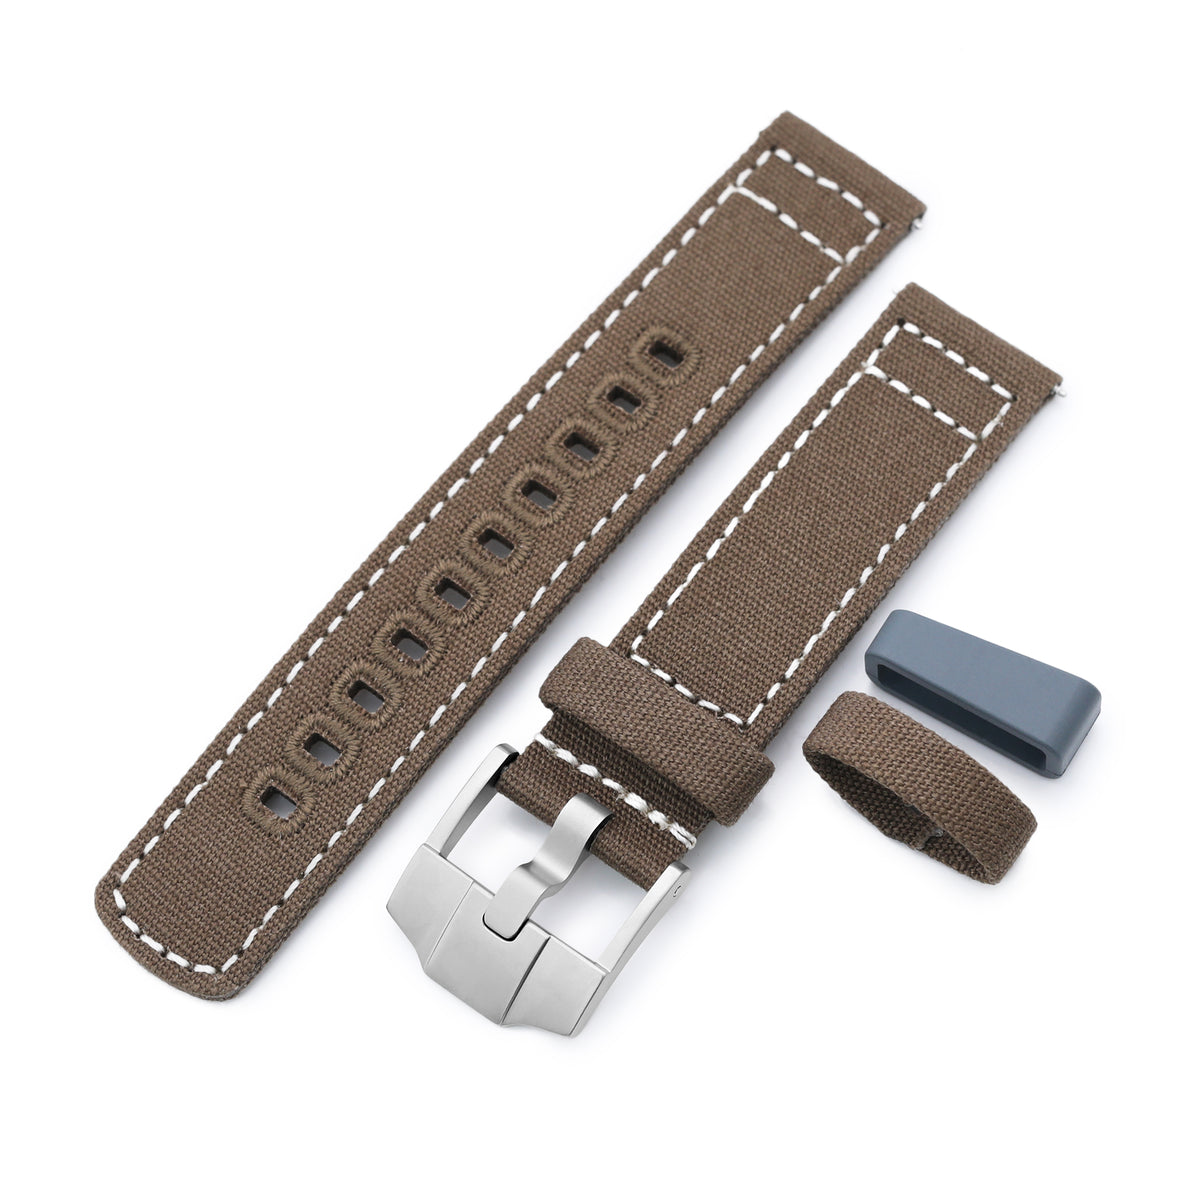 20mm Tan Color Quick Release Canvas Watch Strap Strapcode Watch Bands